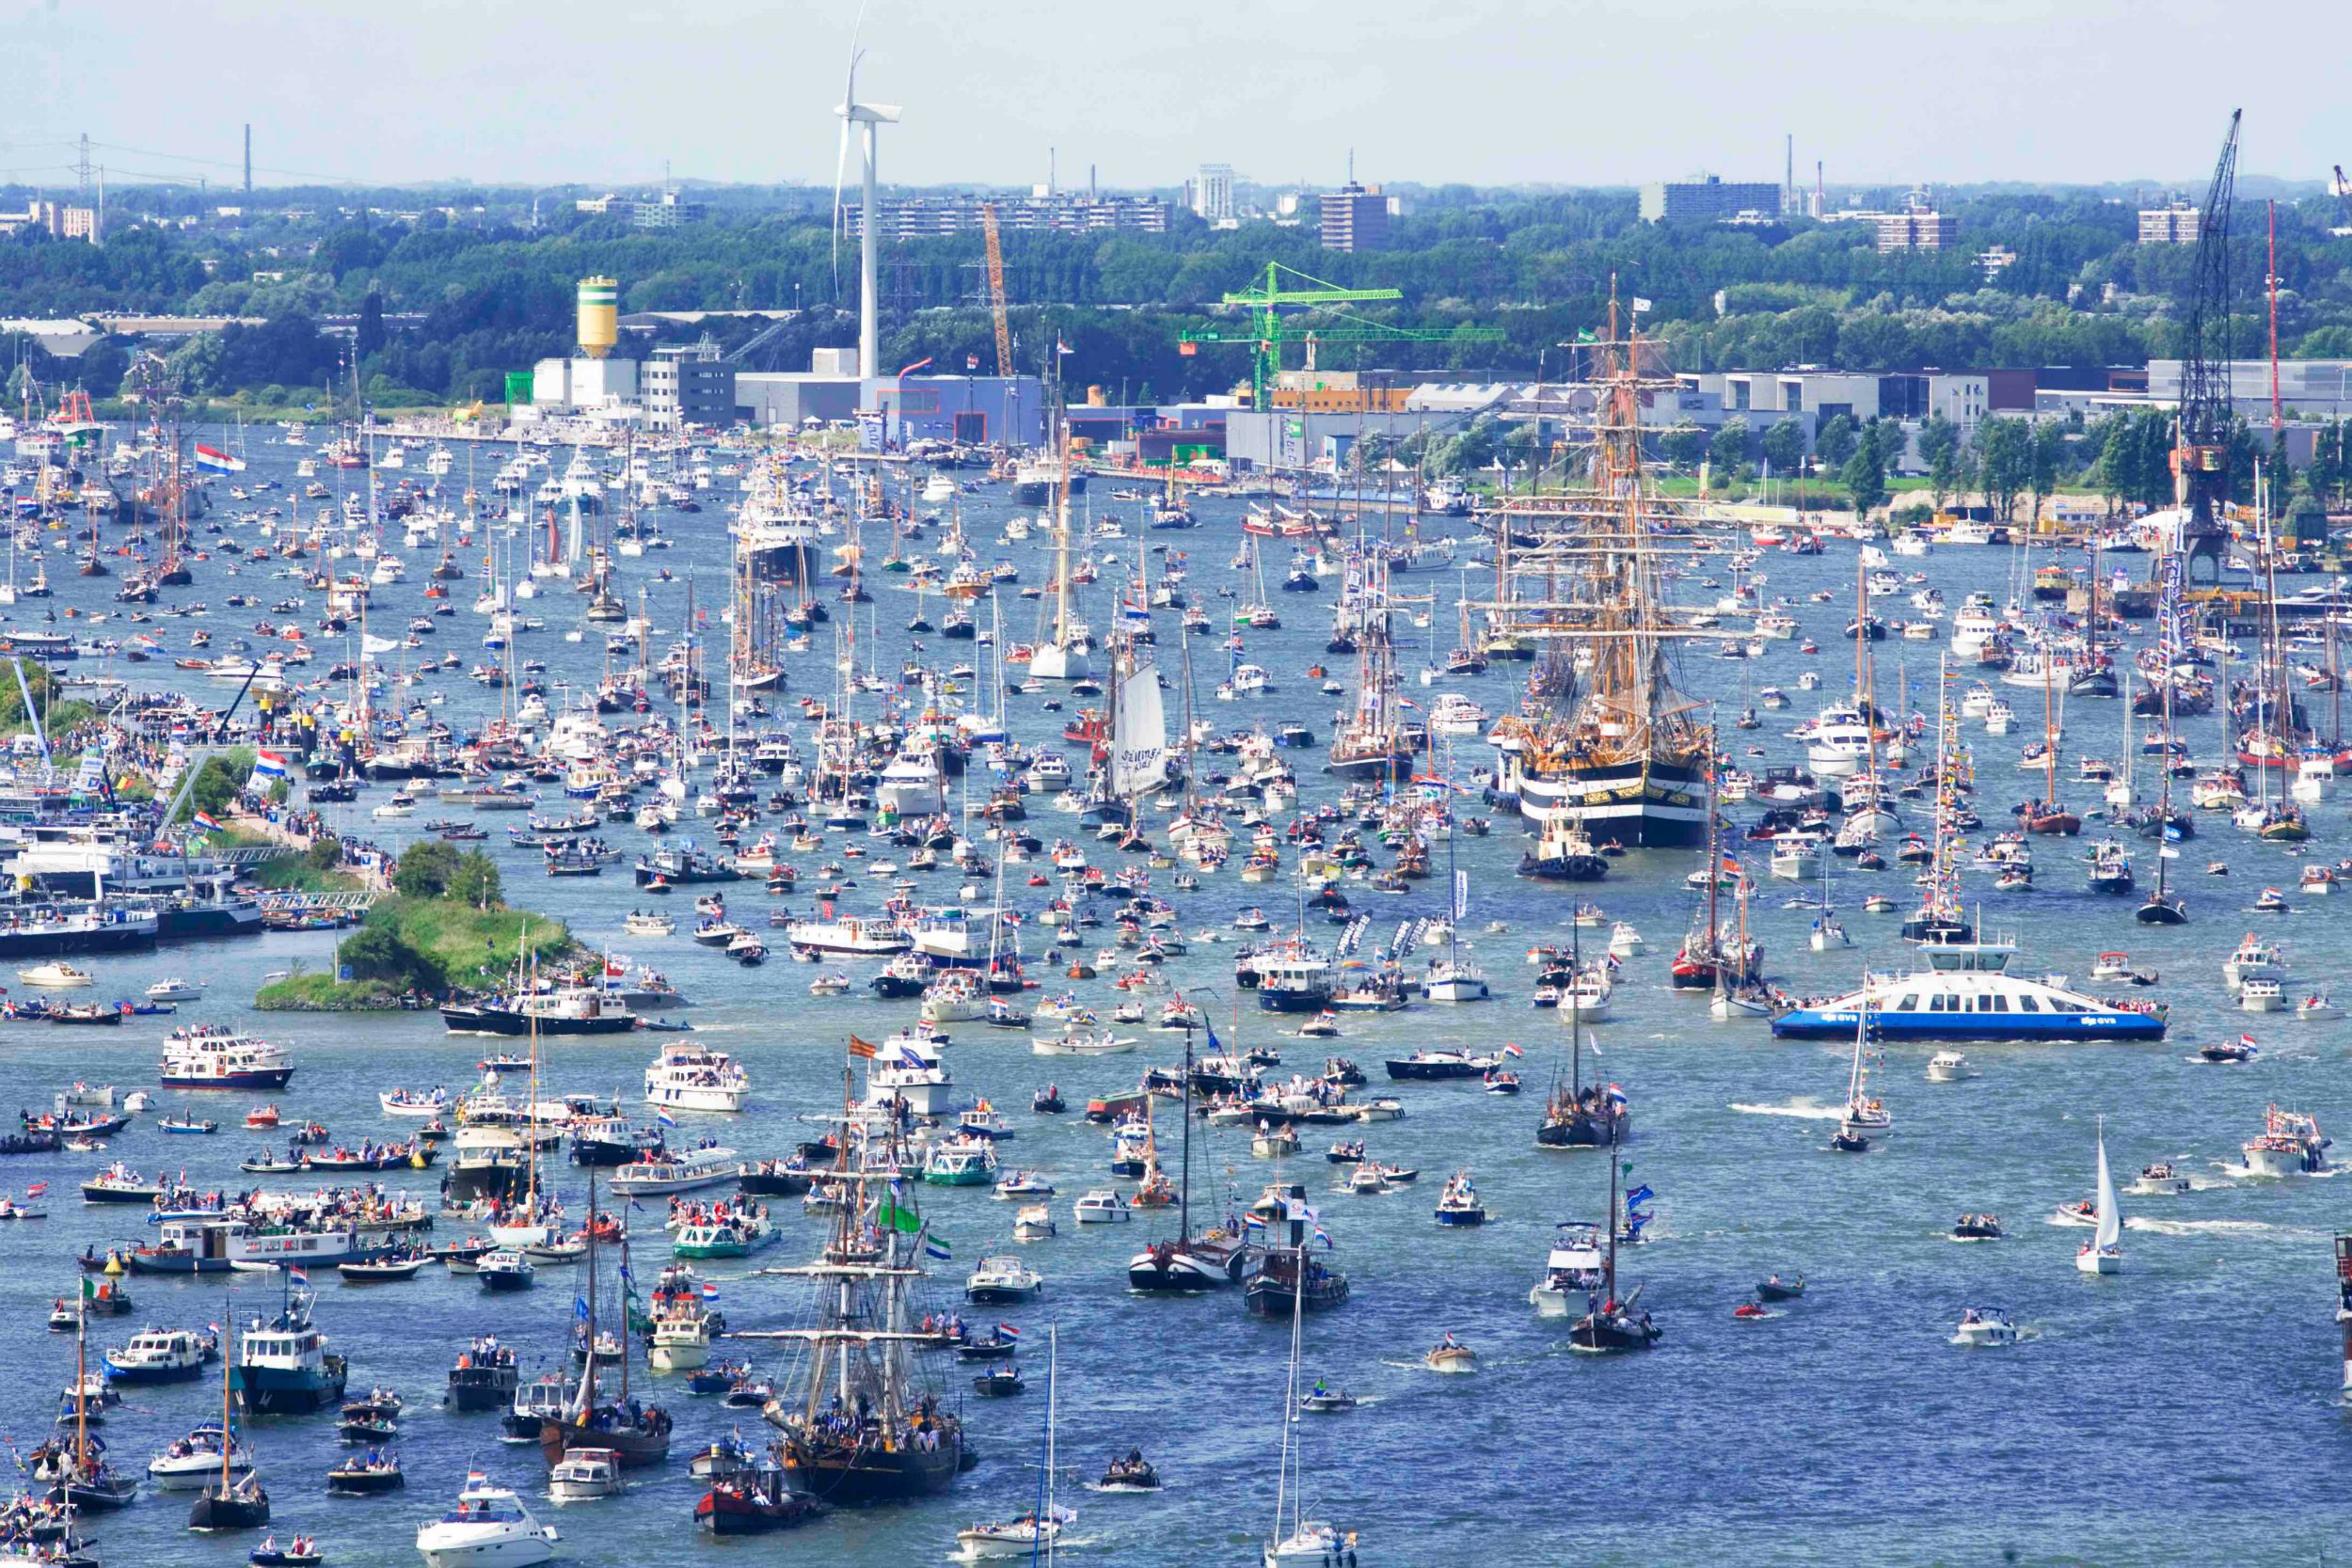 Sail Amsterdam, sailing ships in city The Golden Scope